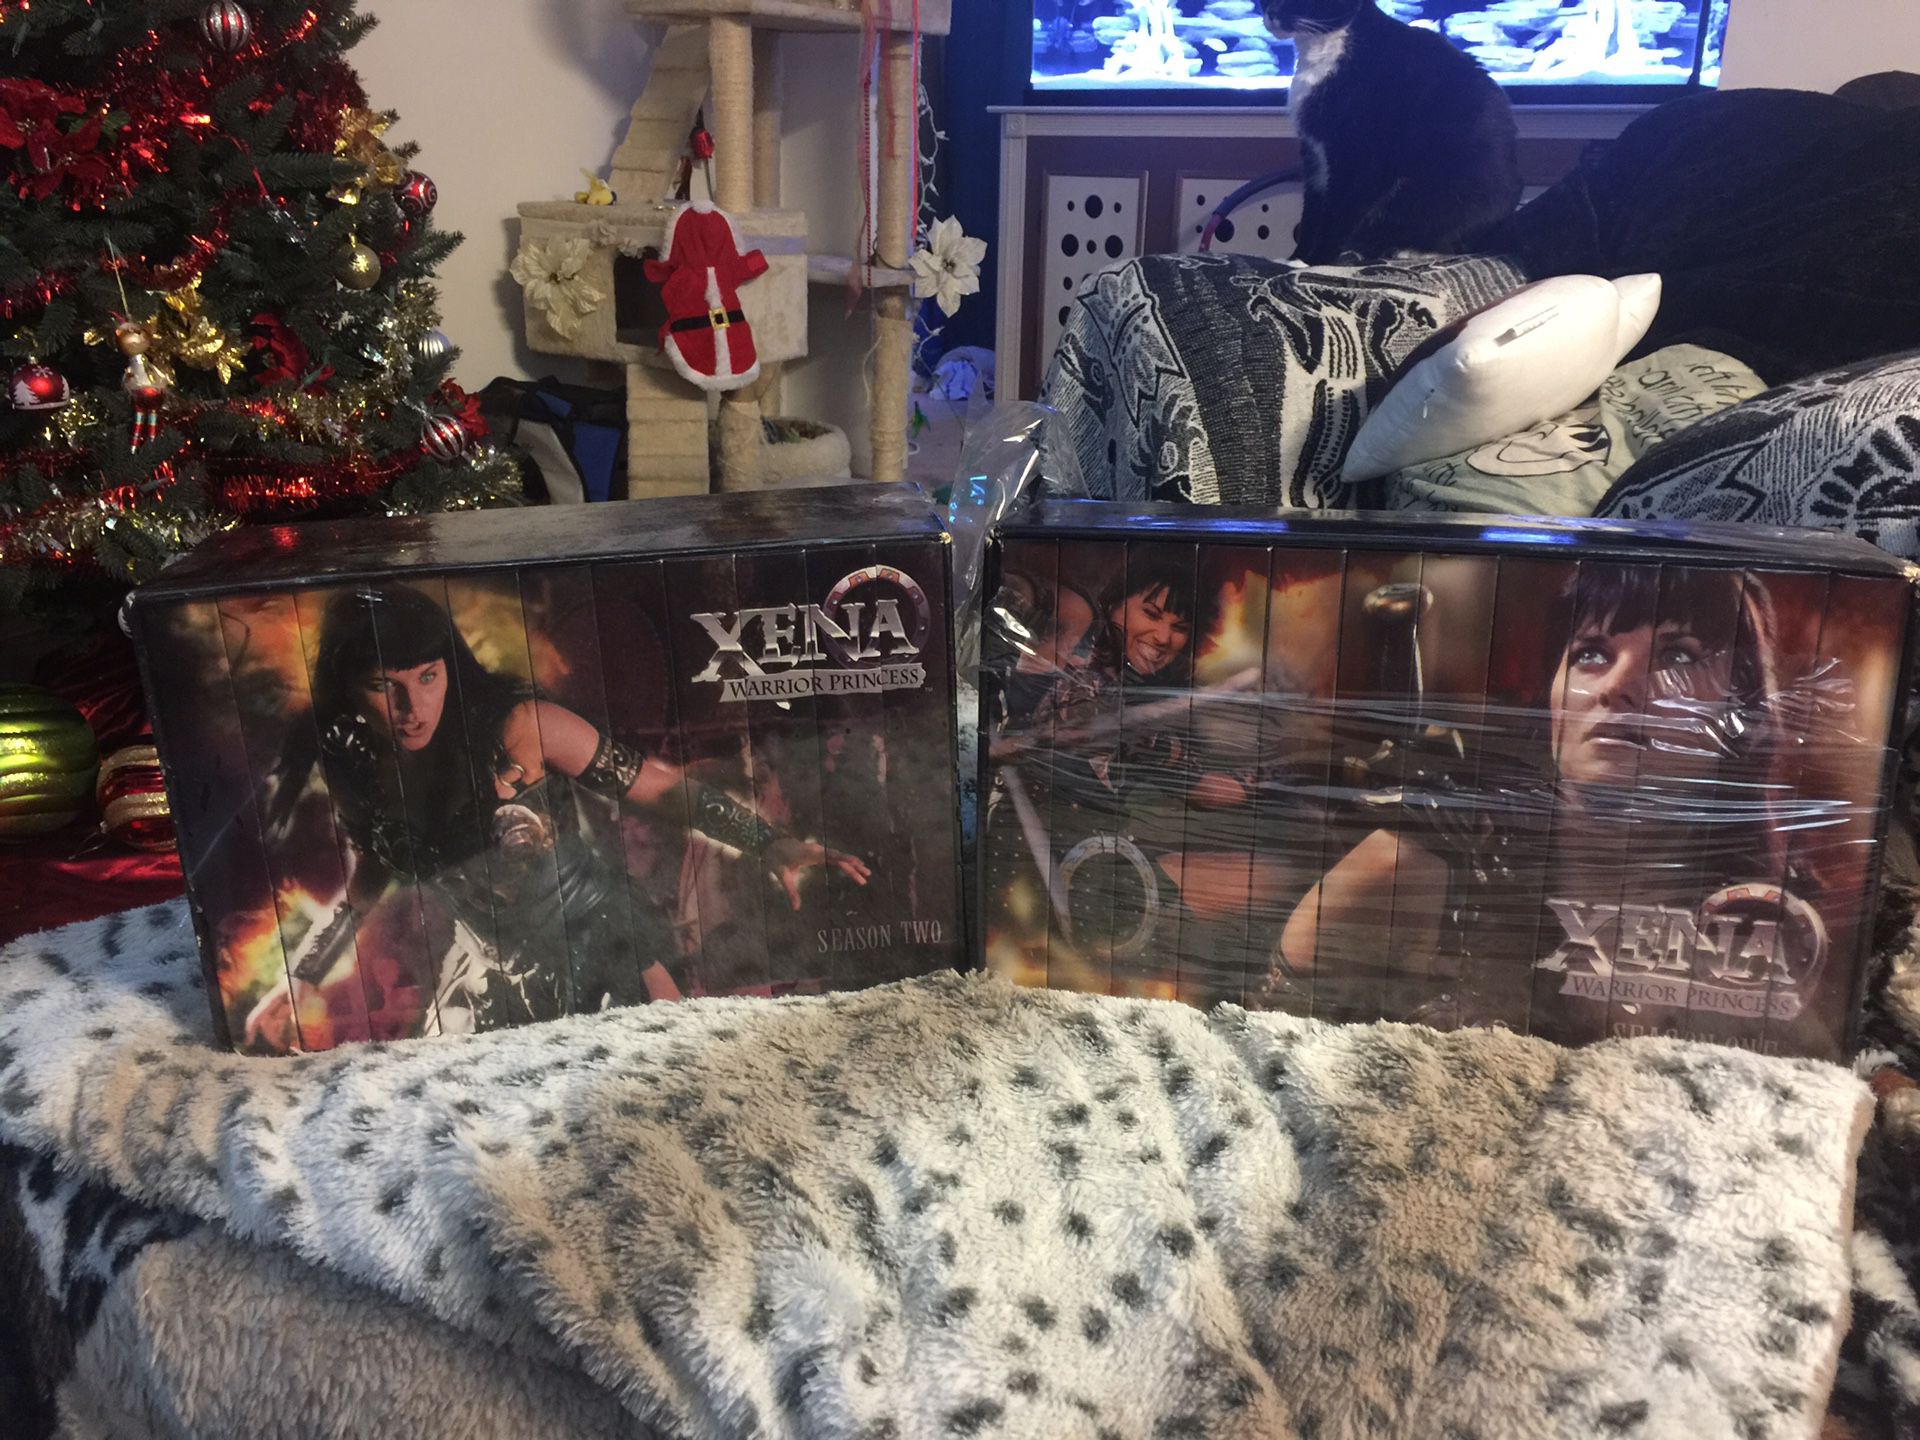 Collectible Xena vhs tapes